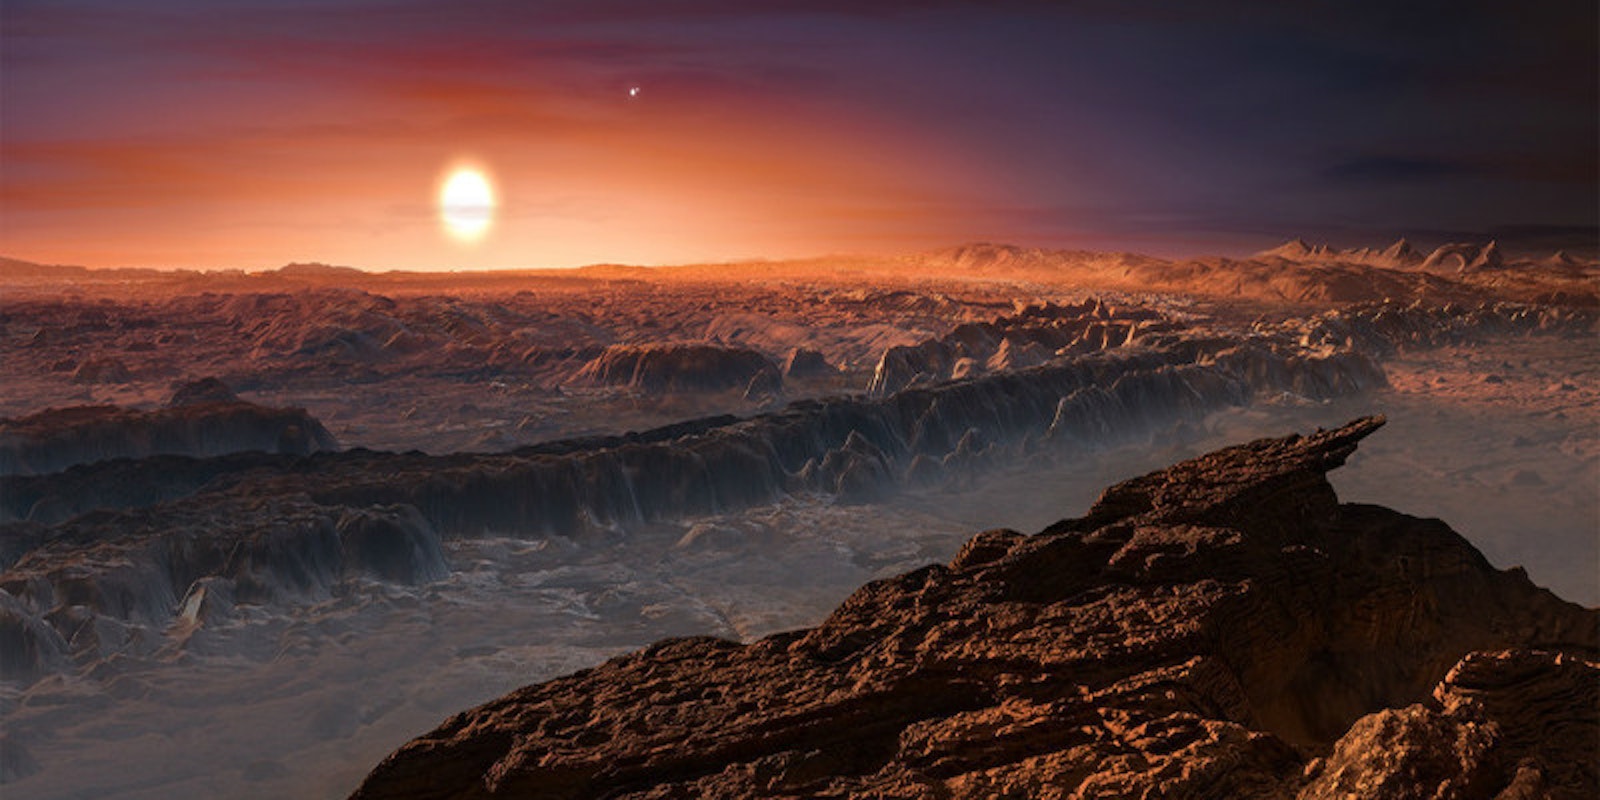 Artist's rendering of Proxima b, where METI scientists hope there might be aliens capable of deciphering our radio transmissions.